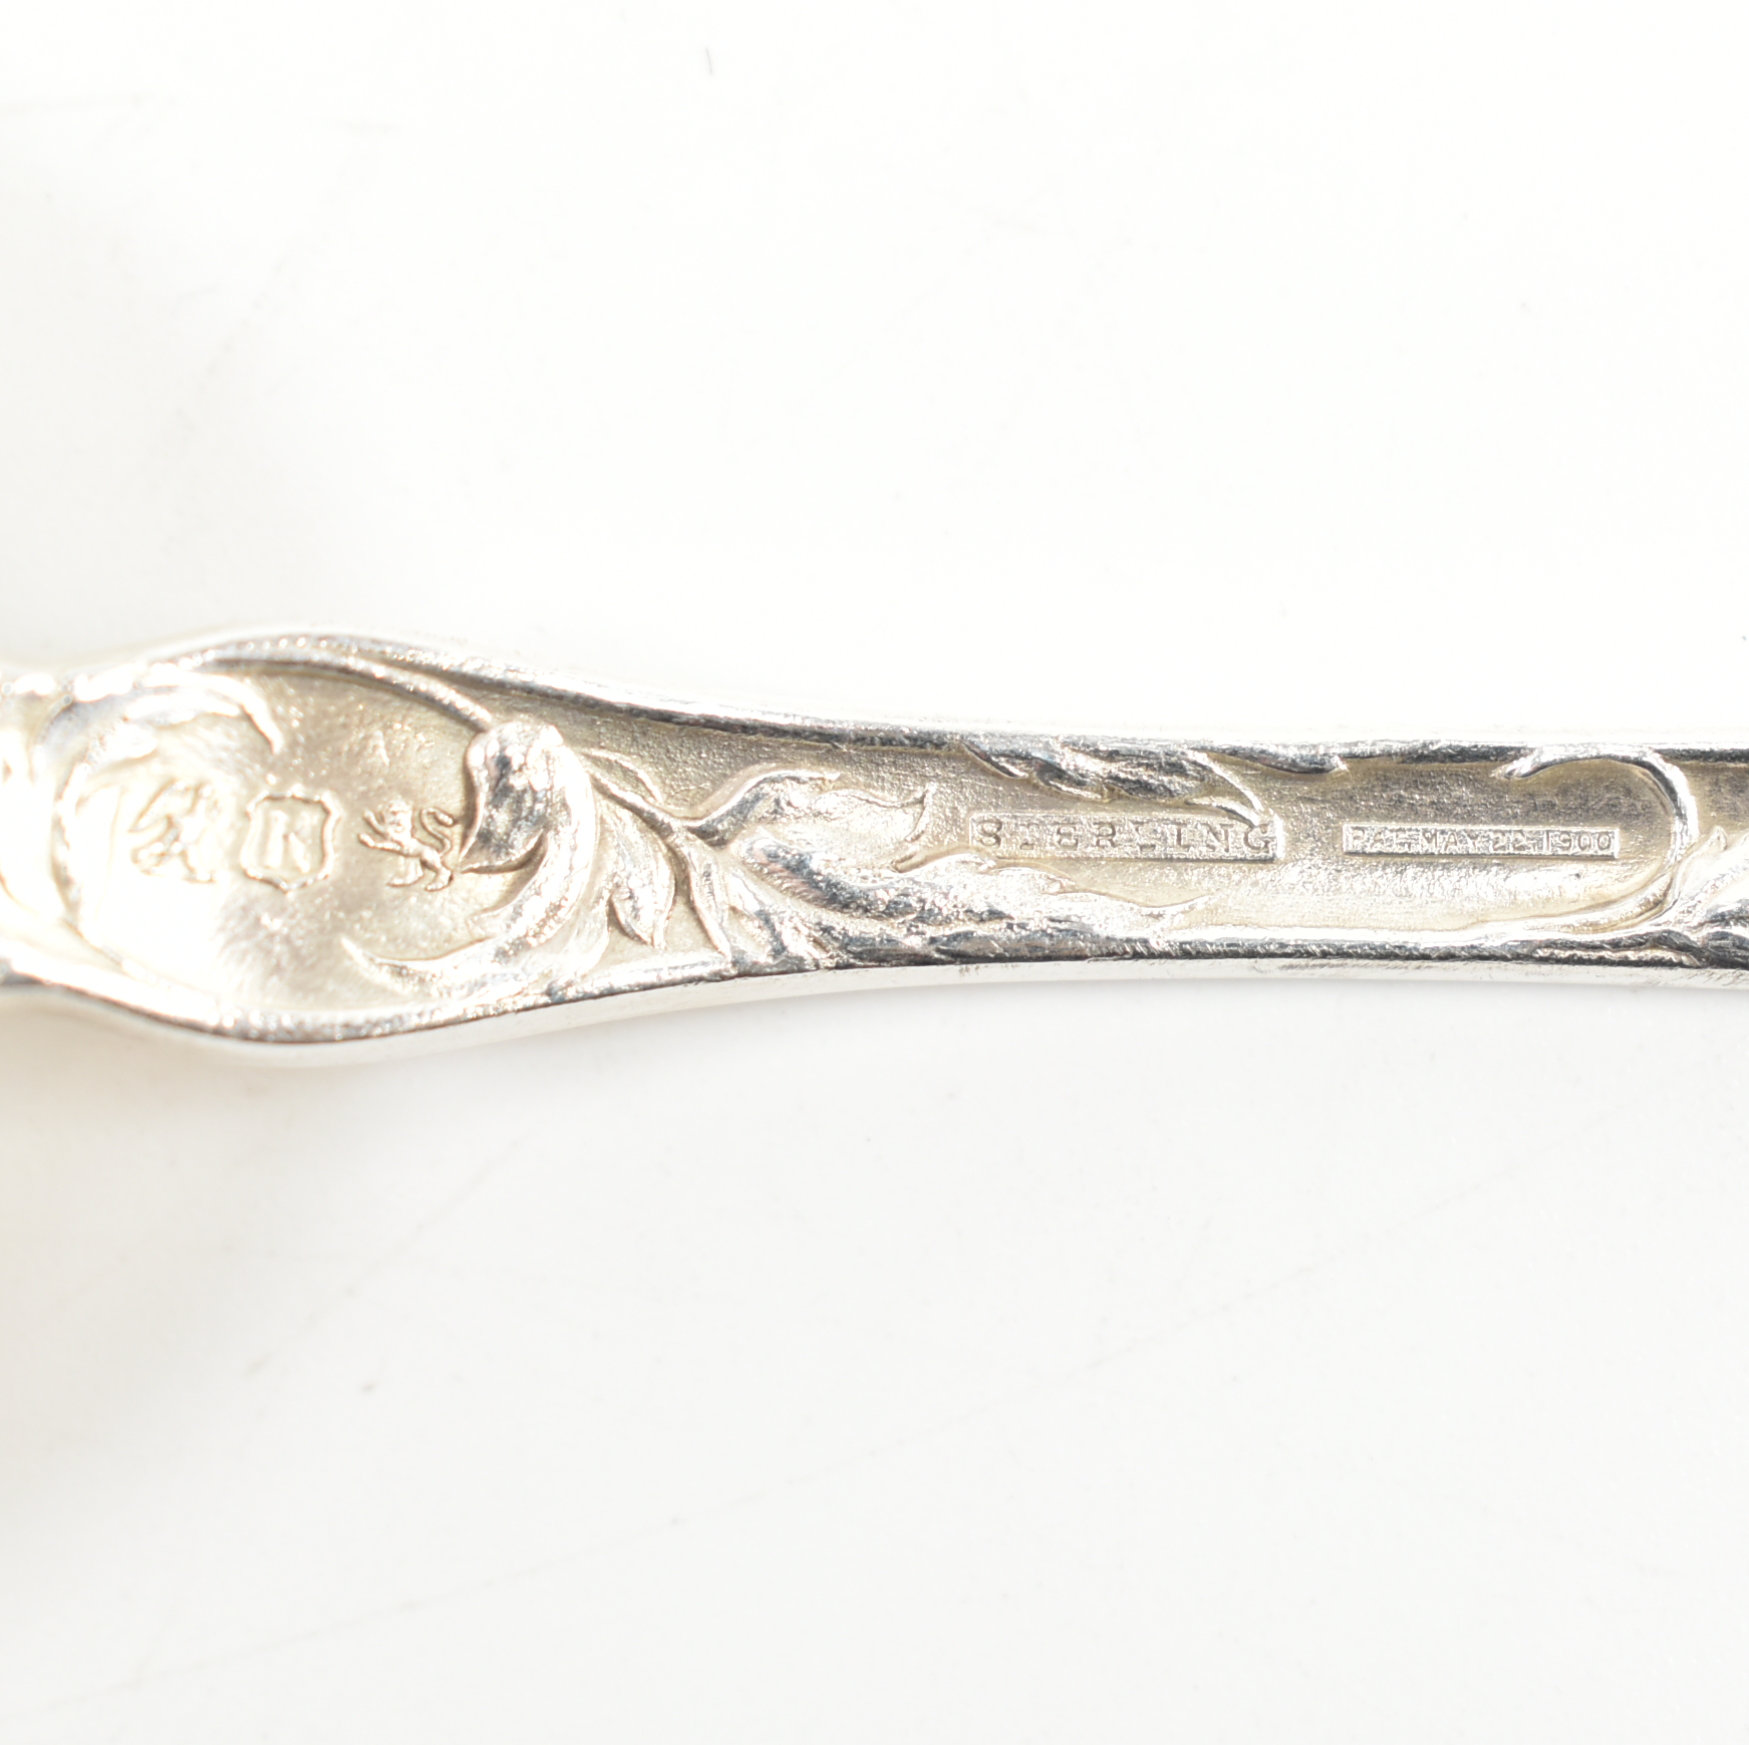 TWO REED & BARTON STERLING SILVER SERVING SPOONS - Image 3 of 3